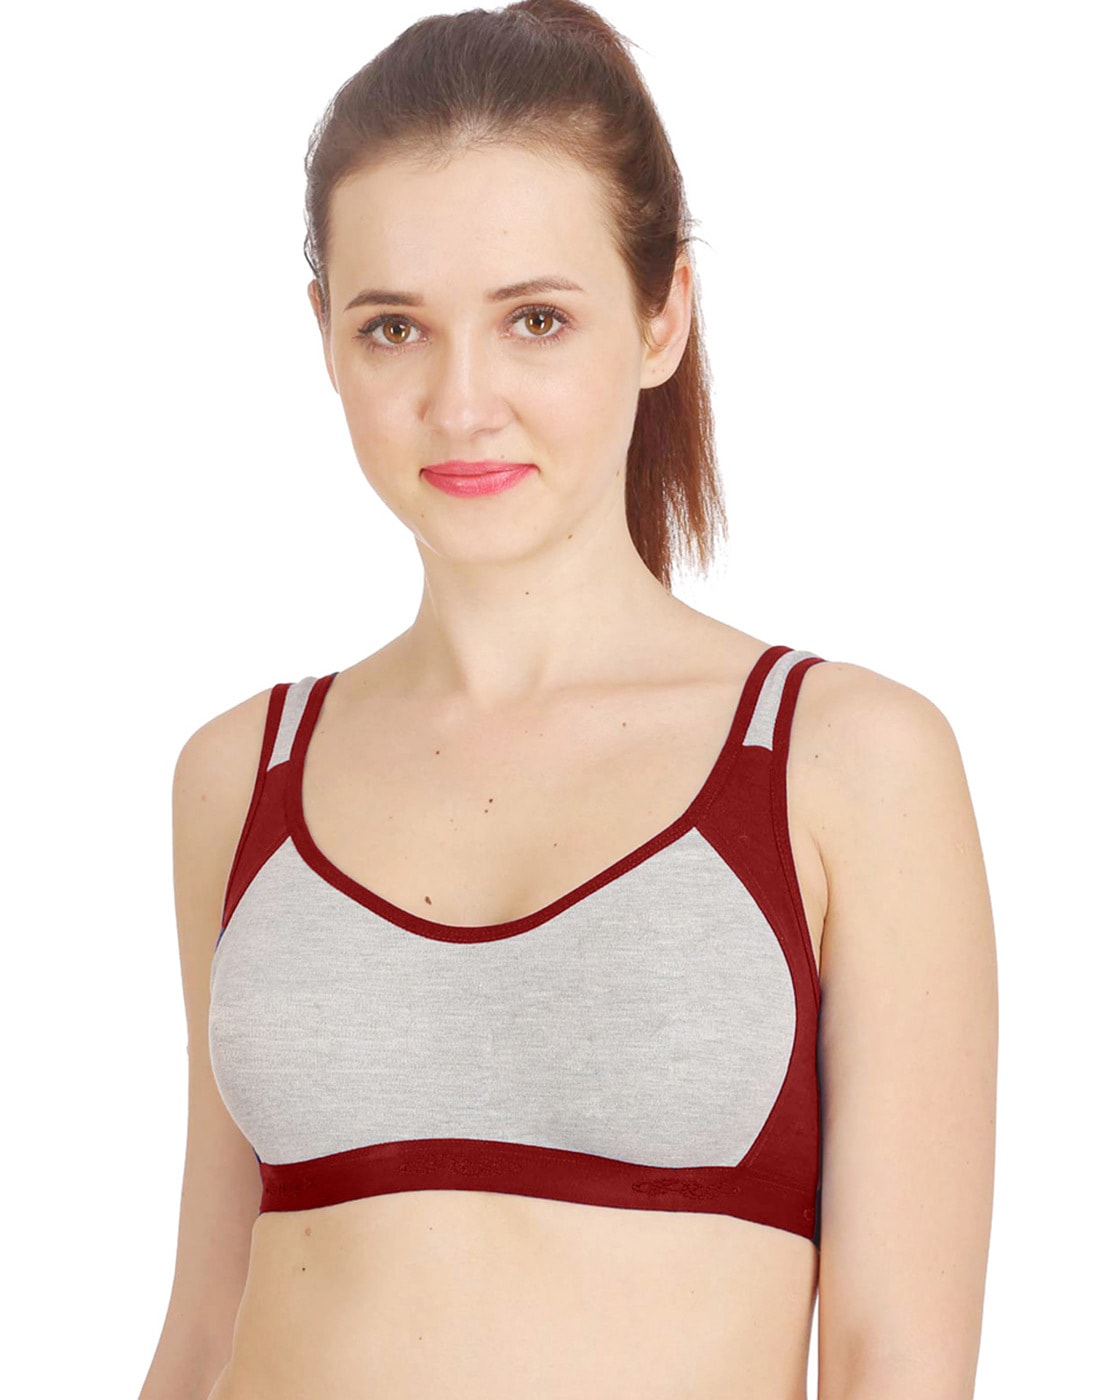 Buy LooksOMG's Cotton Lycra Sports bra in Maroon & Gajri Color Pack of 2.  Online at Best Prices in India - JioMart.